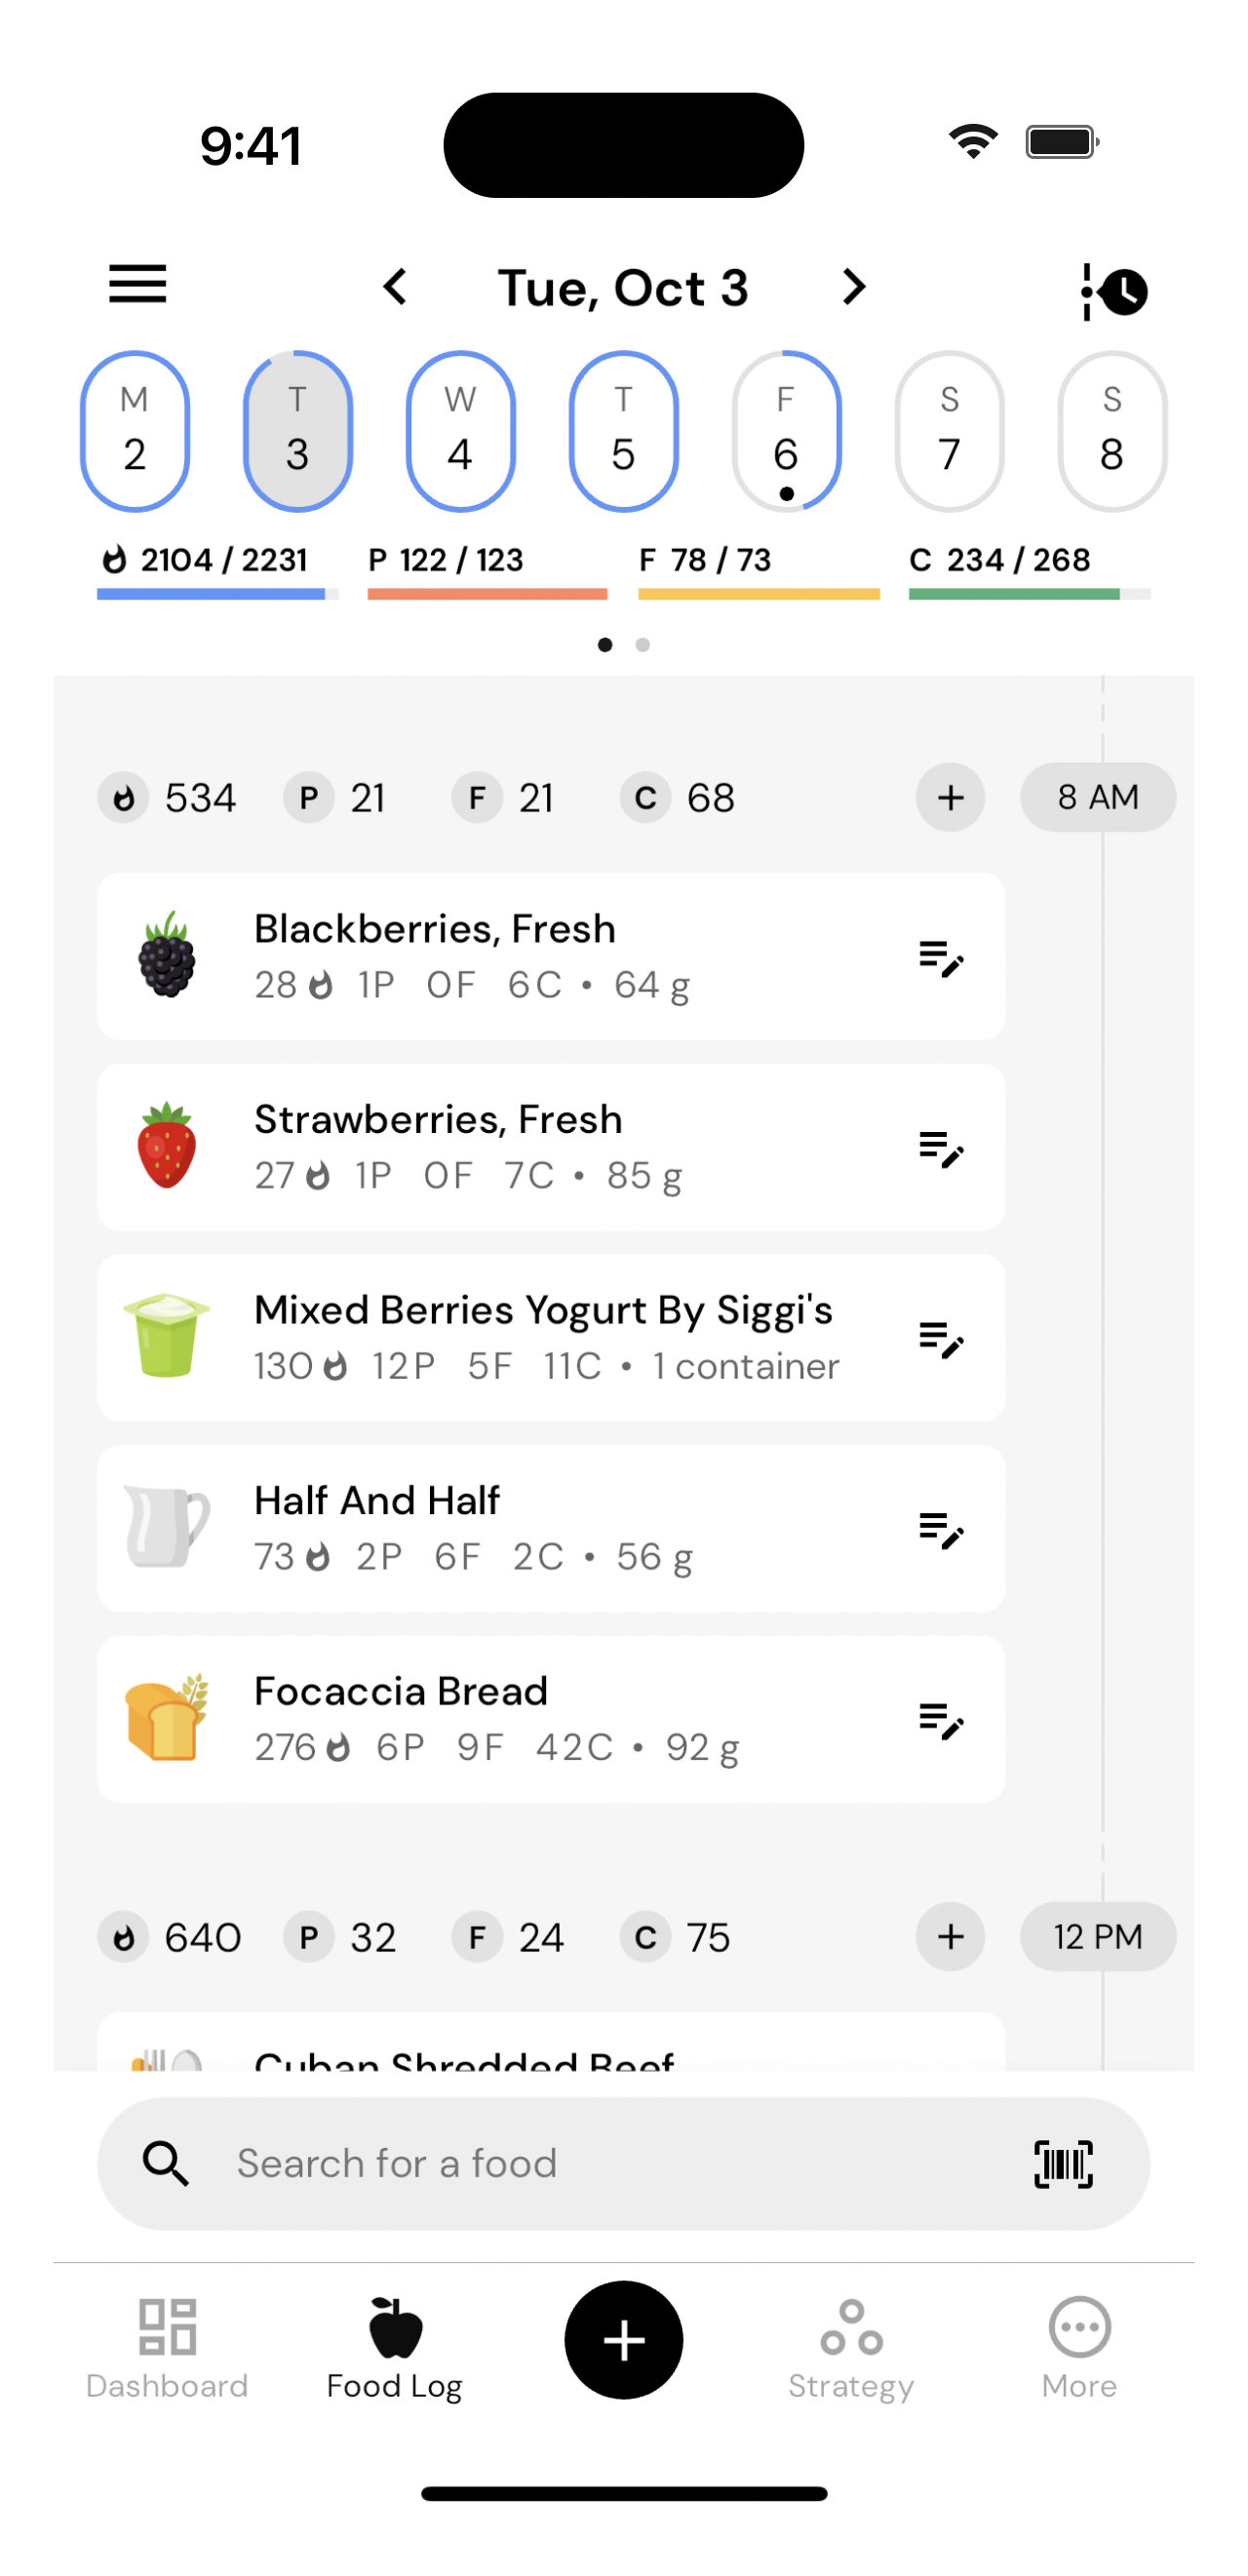 MacroFactor's food log is the fastest on the market